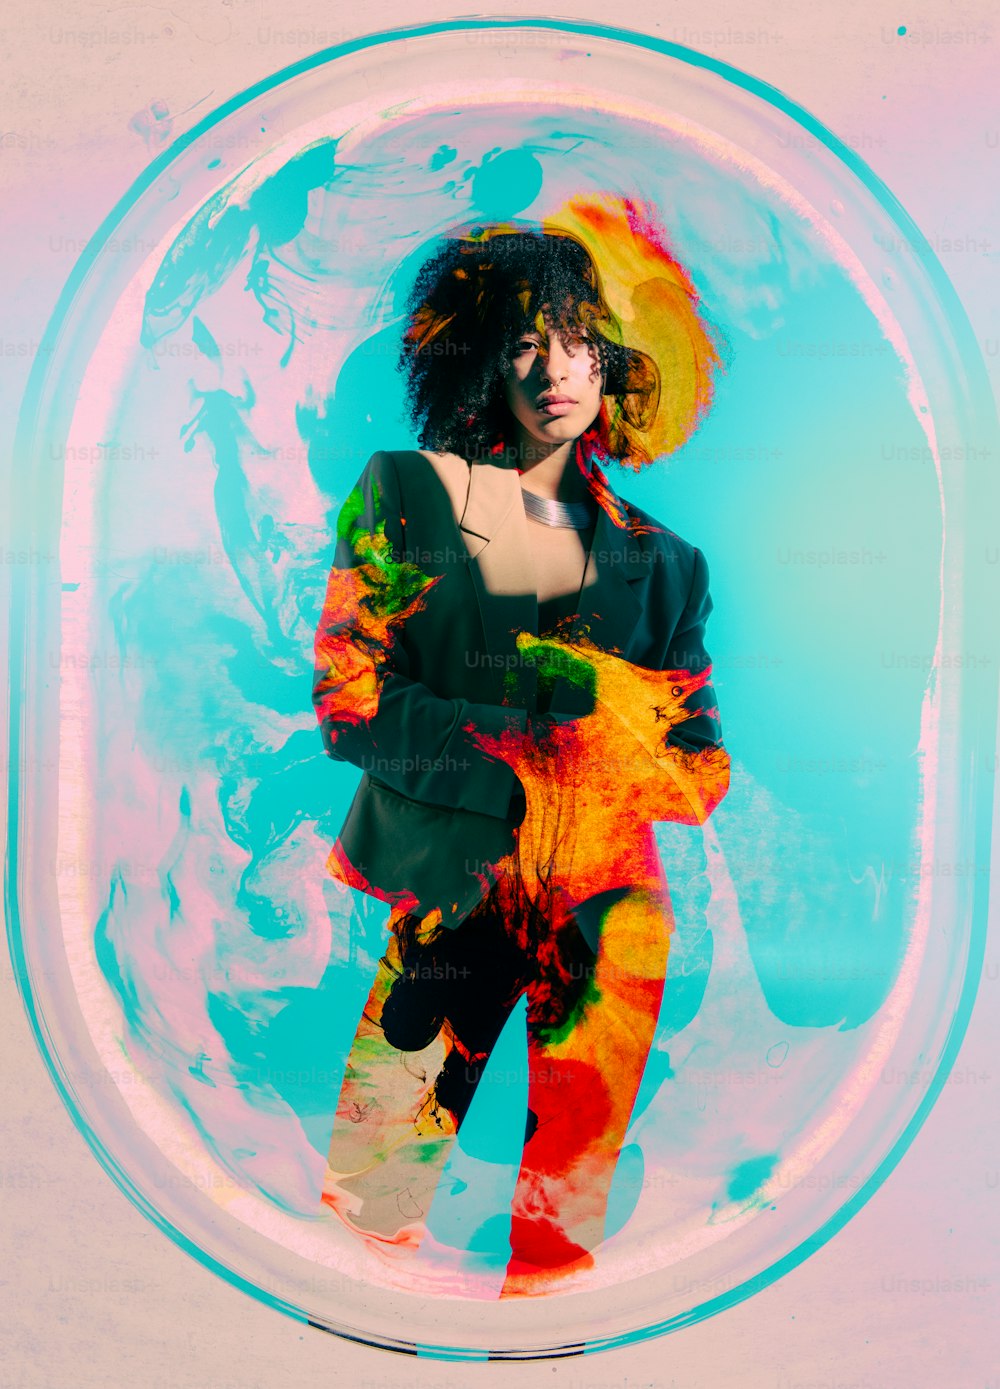 a woman is standing in a glass bowl